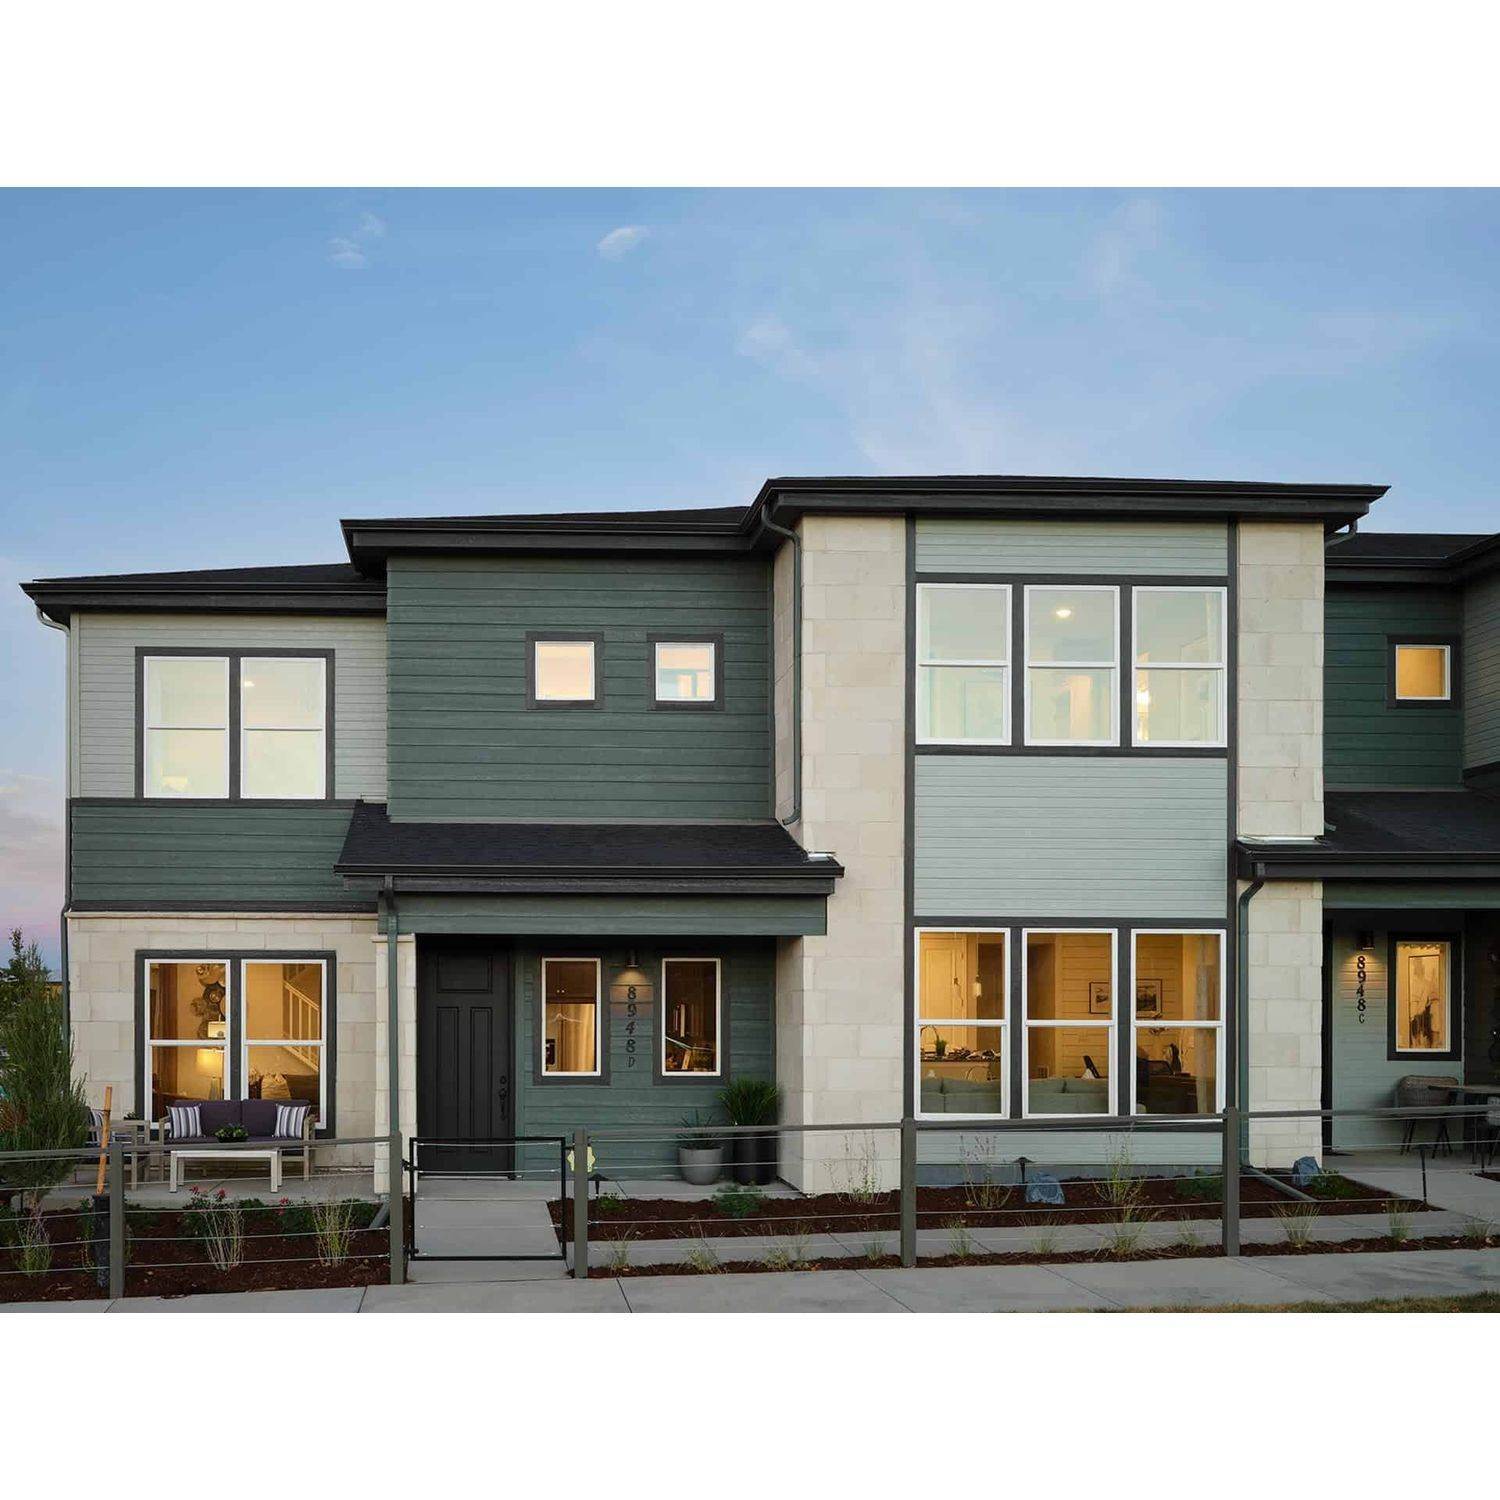 4. Sterling Ranch Townhomes edificio a 8941 Fraser River St., Littleton, CO 80125